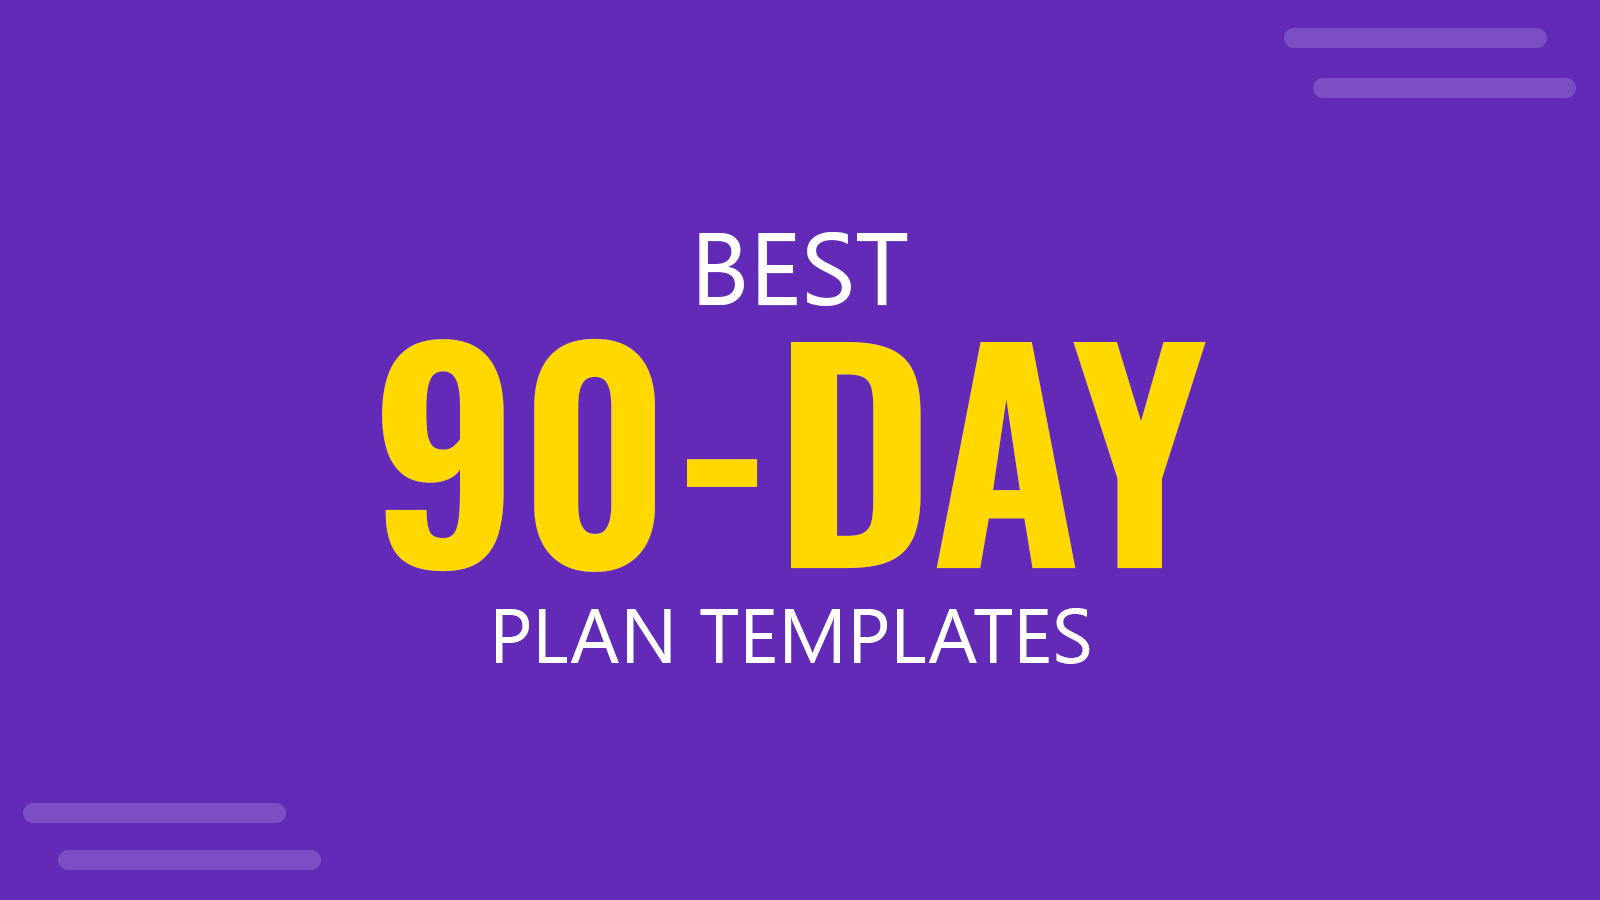 5+ Best 90 Day Plan Templates for PowerPoint